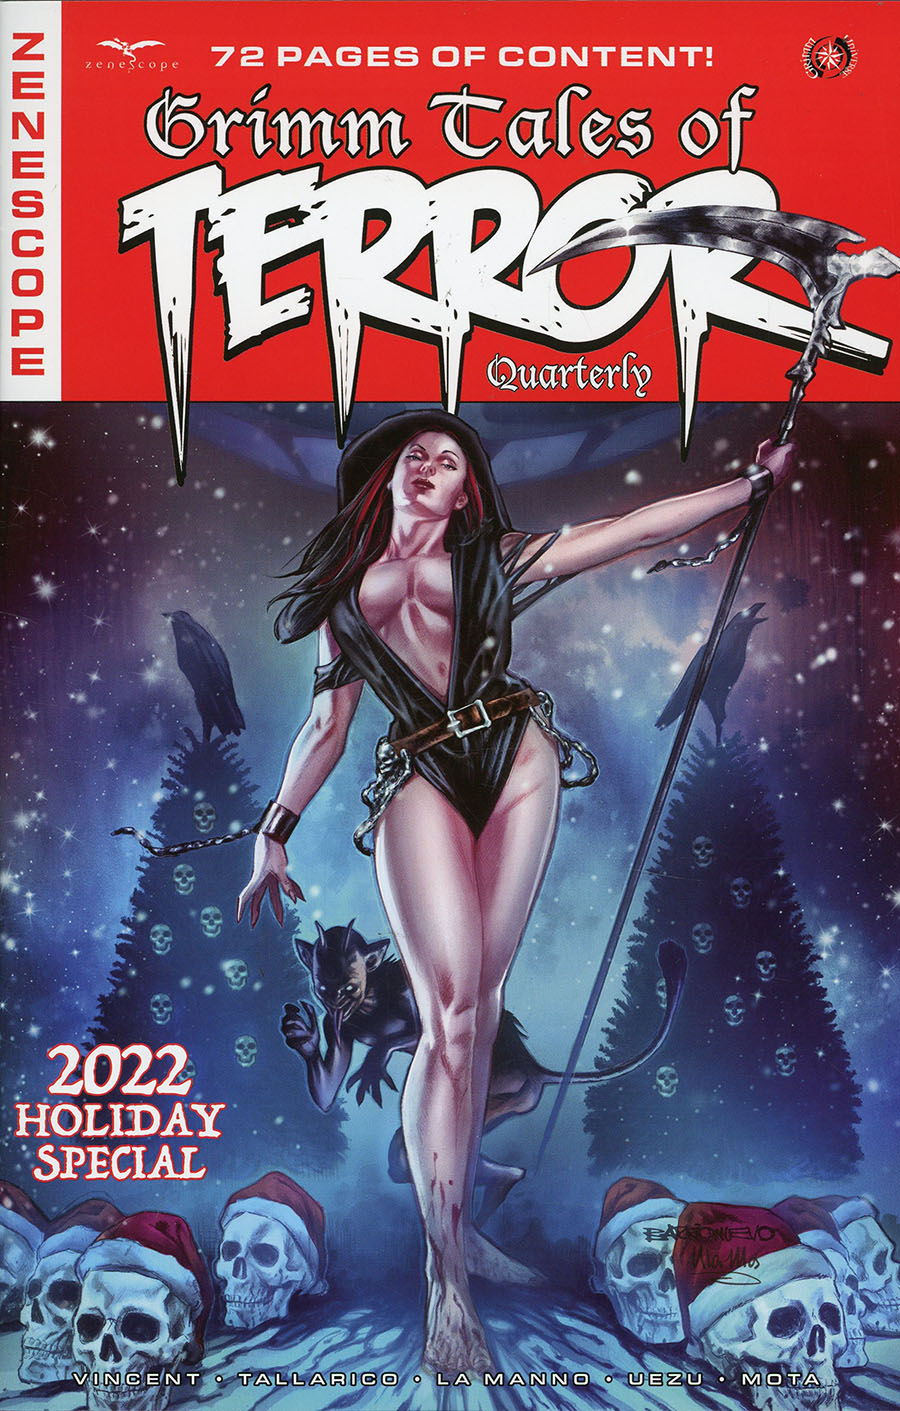 Grimm Fairy Tales Presents Grimm Tales Of Terror Quarterly #8 2022 Holiday Special Cover A Al Barrionuevo